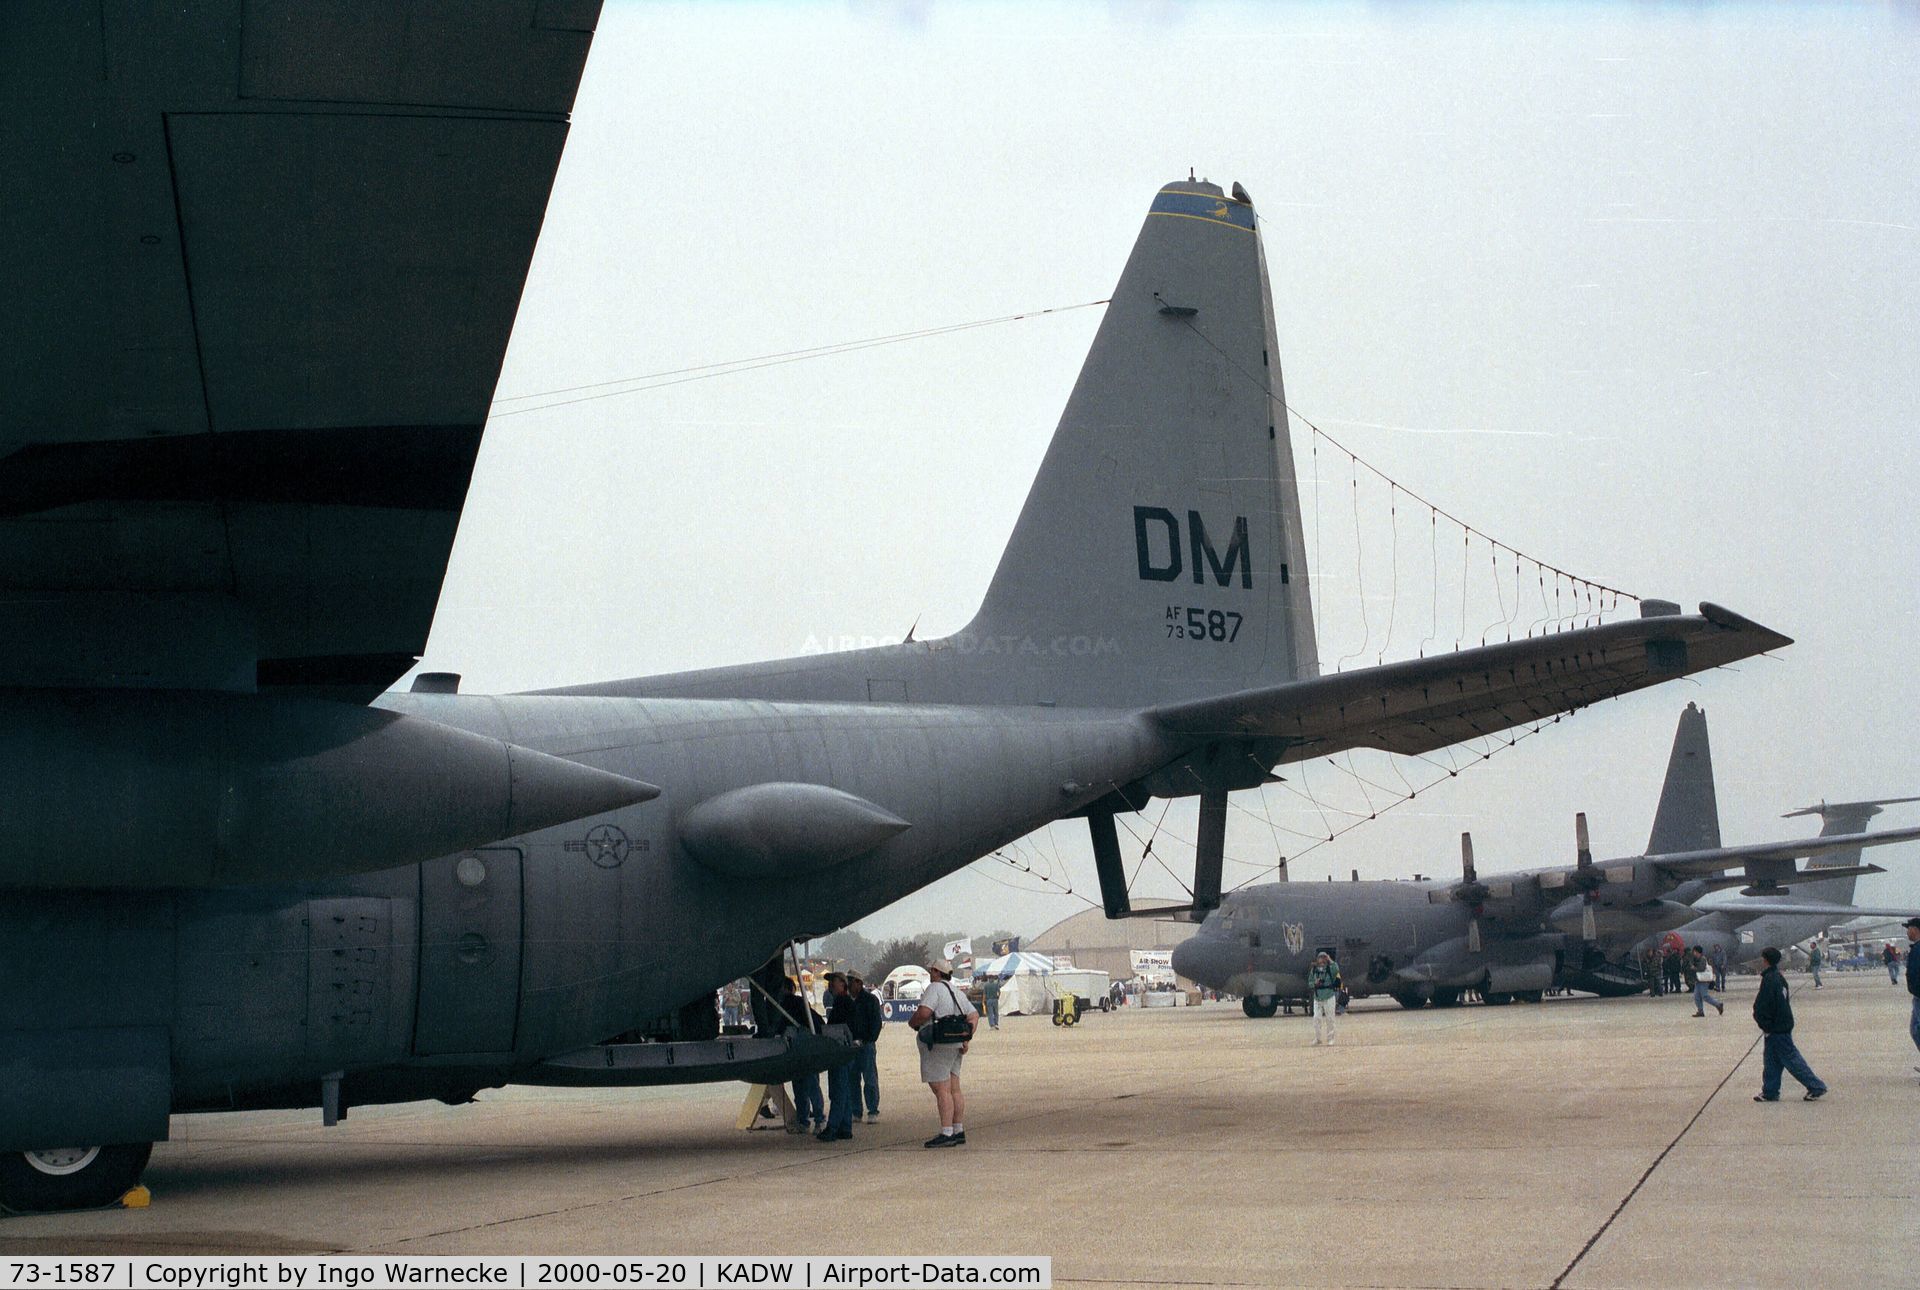 73-1587, 1973 Lockheed EC-130H Compass Call C/N 382-4549, Lockheed EC-130H Hercules of the USAF at Andrews AFB during Armed Forces Day